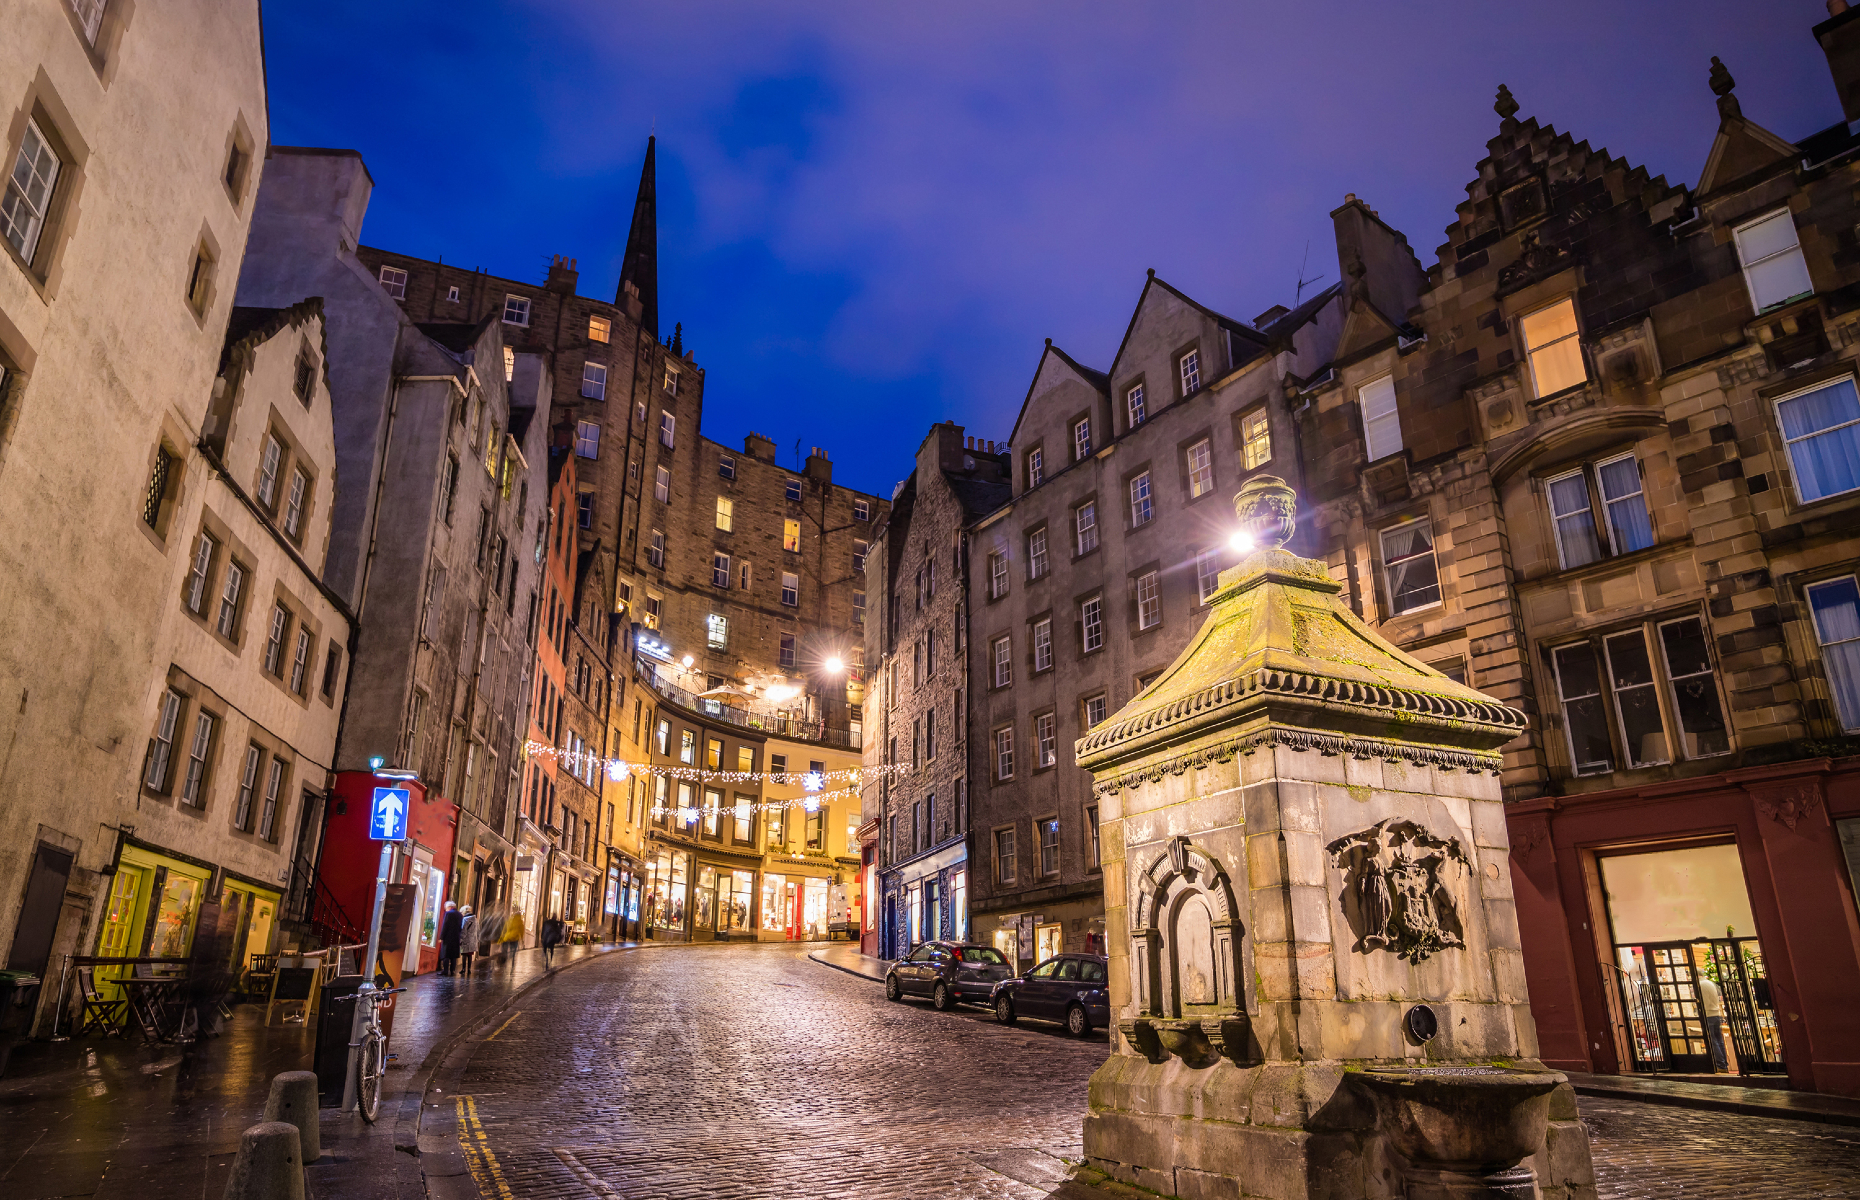 The Royal Mile at night (f11photo/Shutterstock)